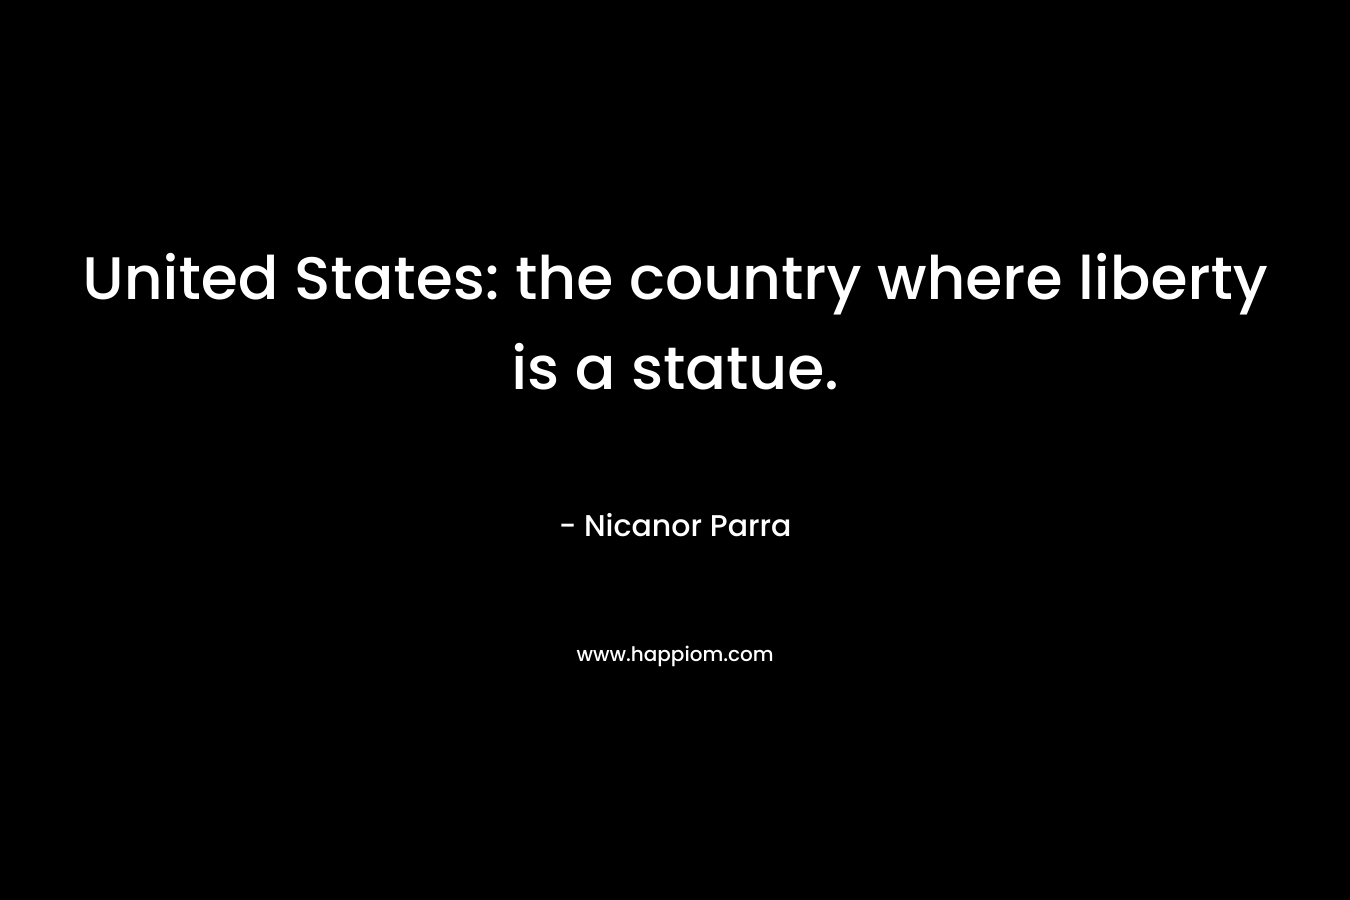 United States: the country where liberty is a statue.